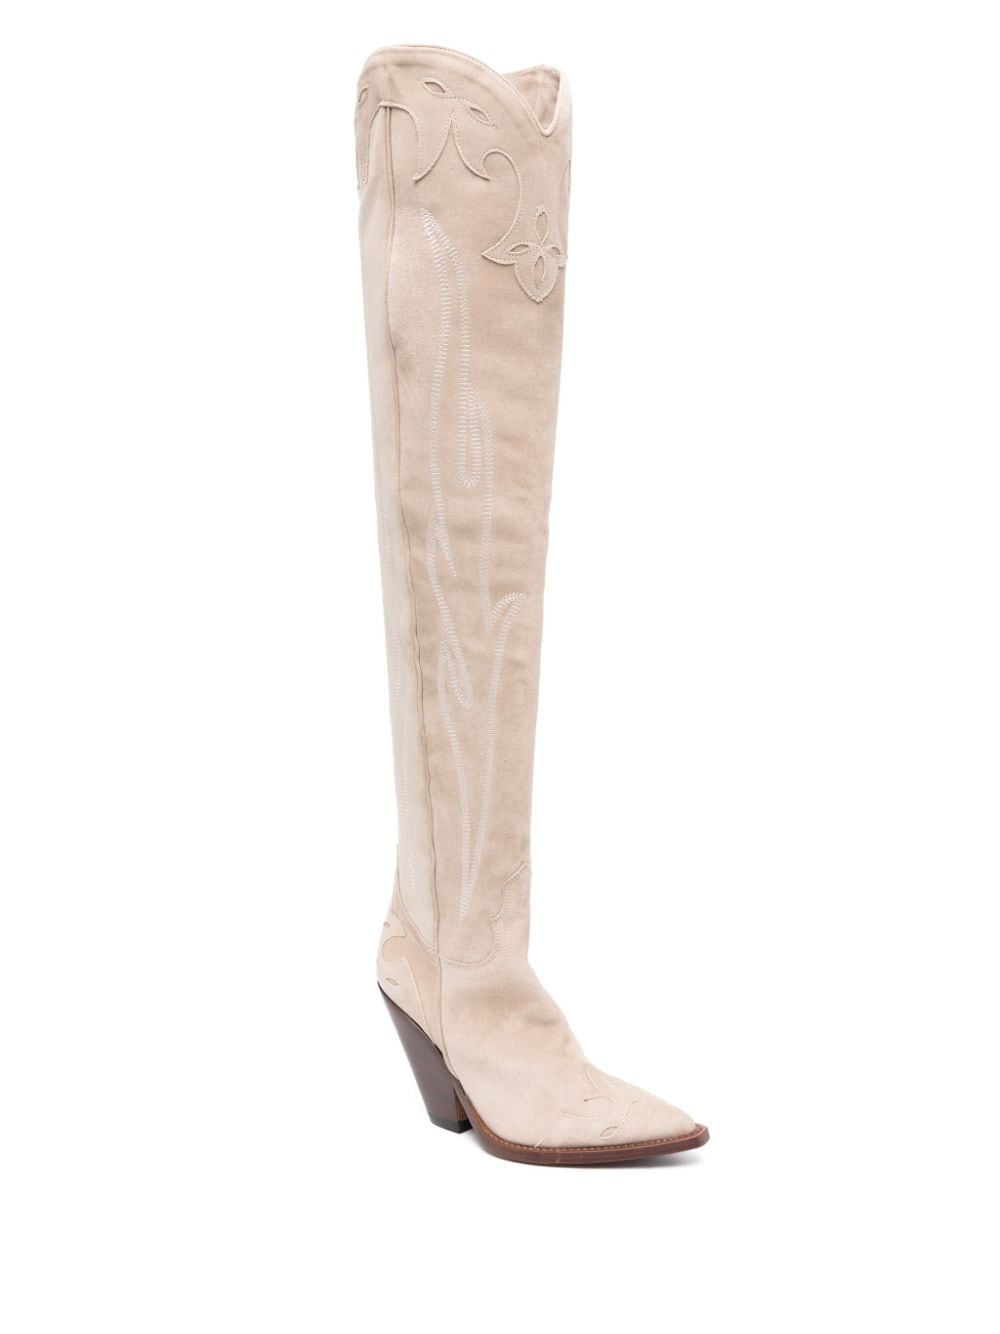 Image 2 of Sonora Santa Fe suede thigh-high boots